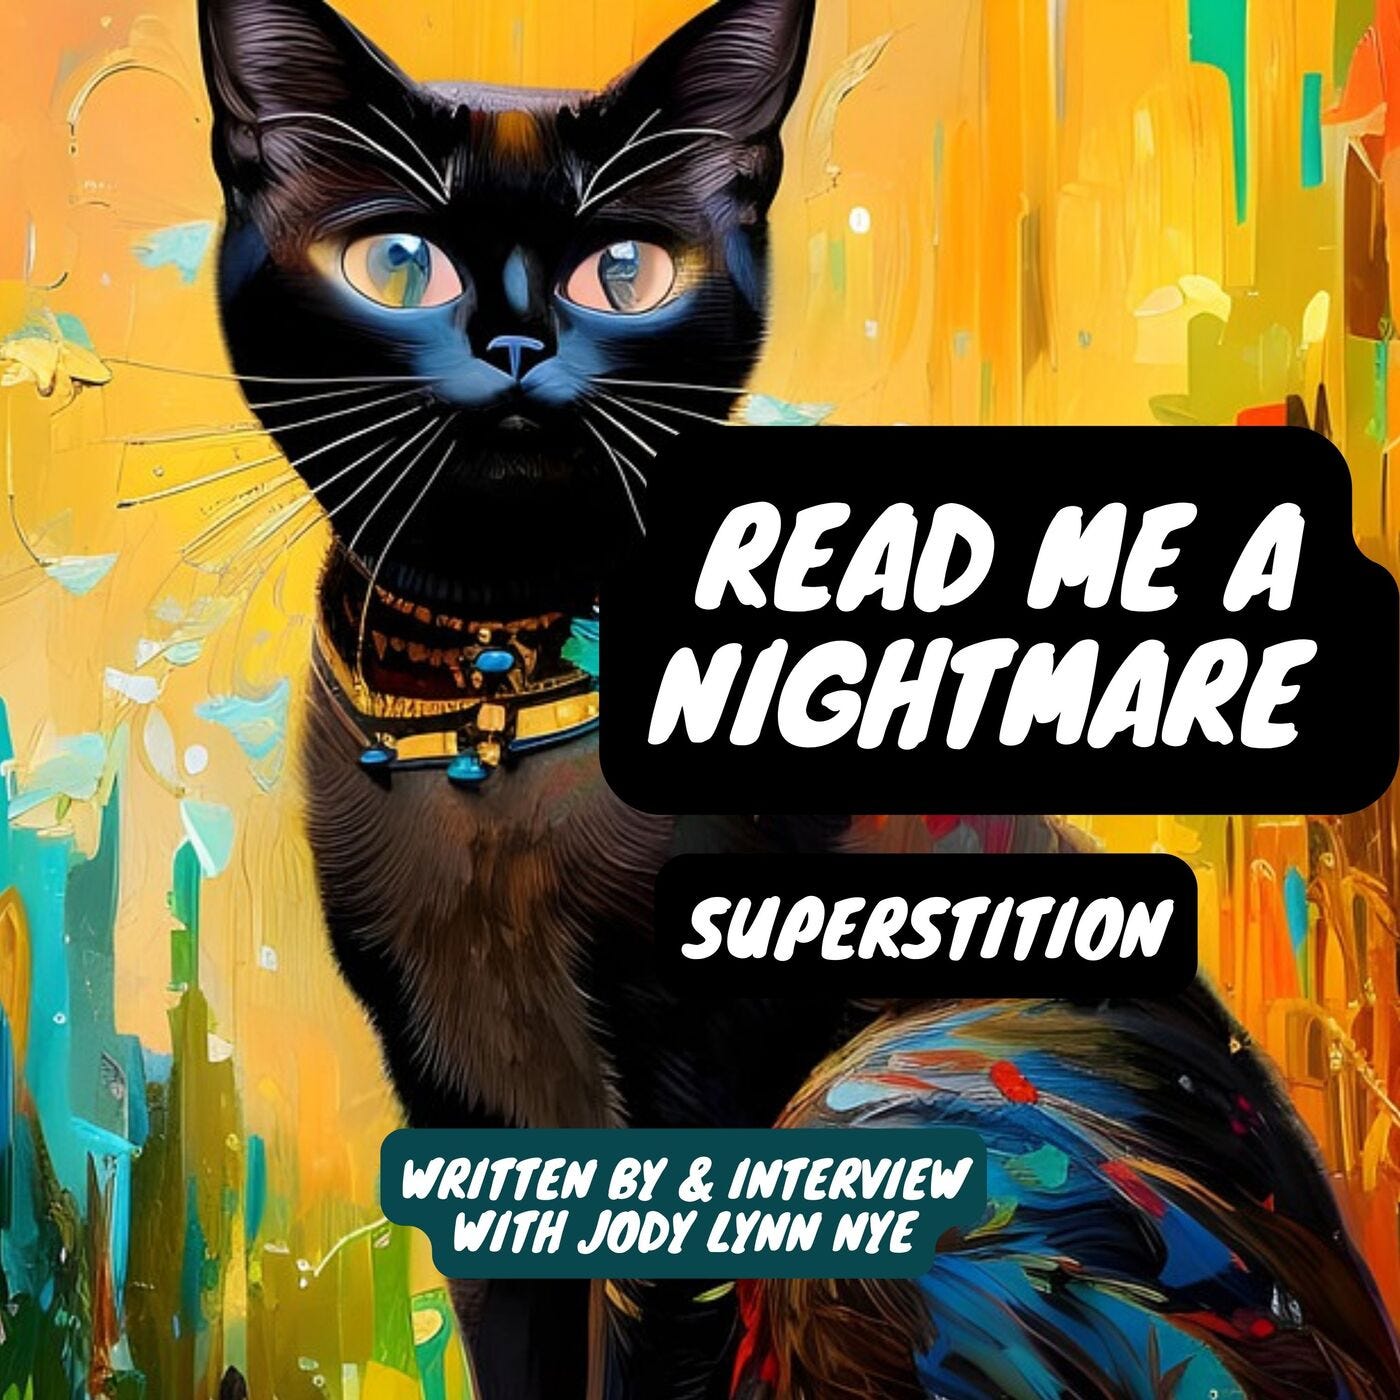 34 Superstition and Interview with Jody Lynn Nye